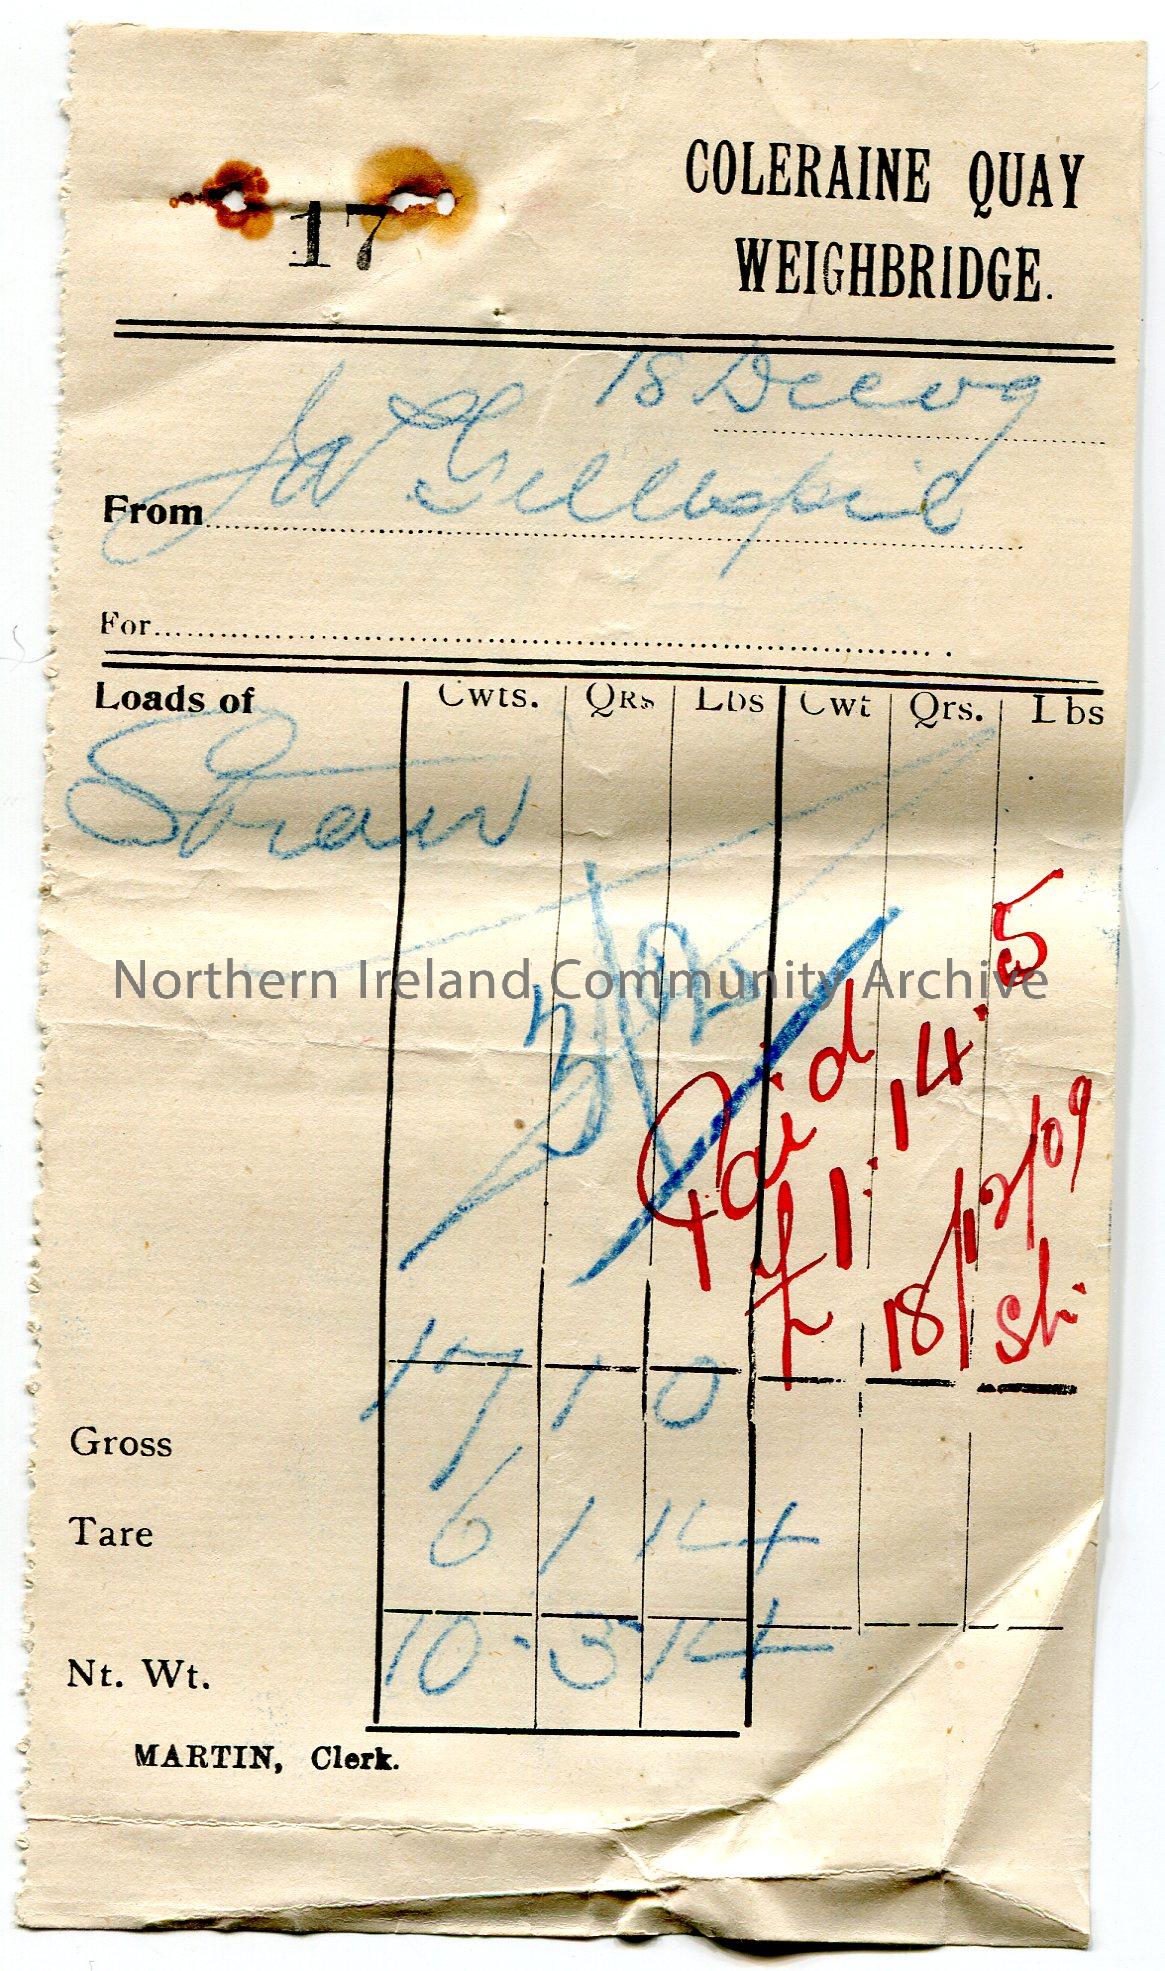 Handwritten receipt from Coleraine Quay Weighbridge. From W Gillespie and dated 18th December, 1909. Payment for straw weighing 10 cwts, 3 qrs and 14 …